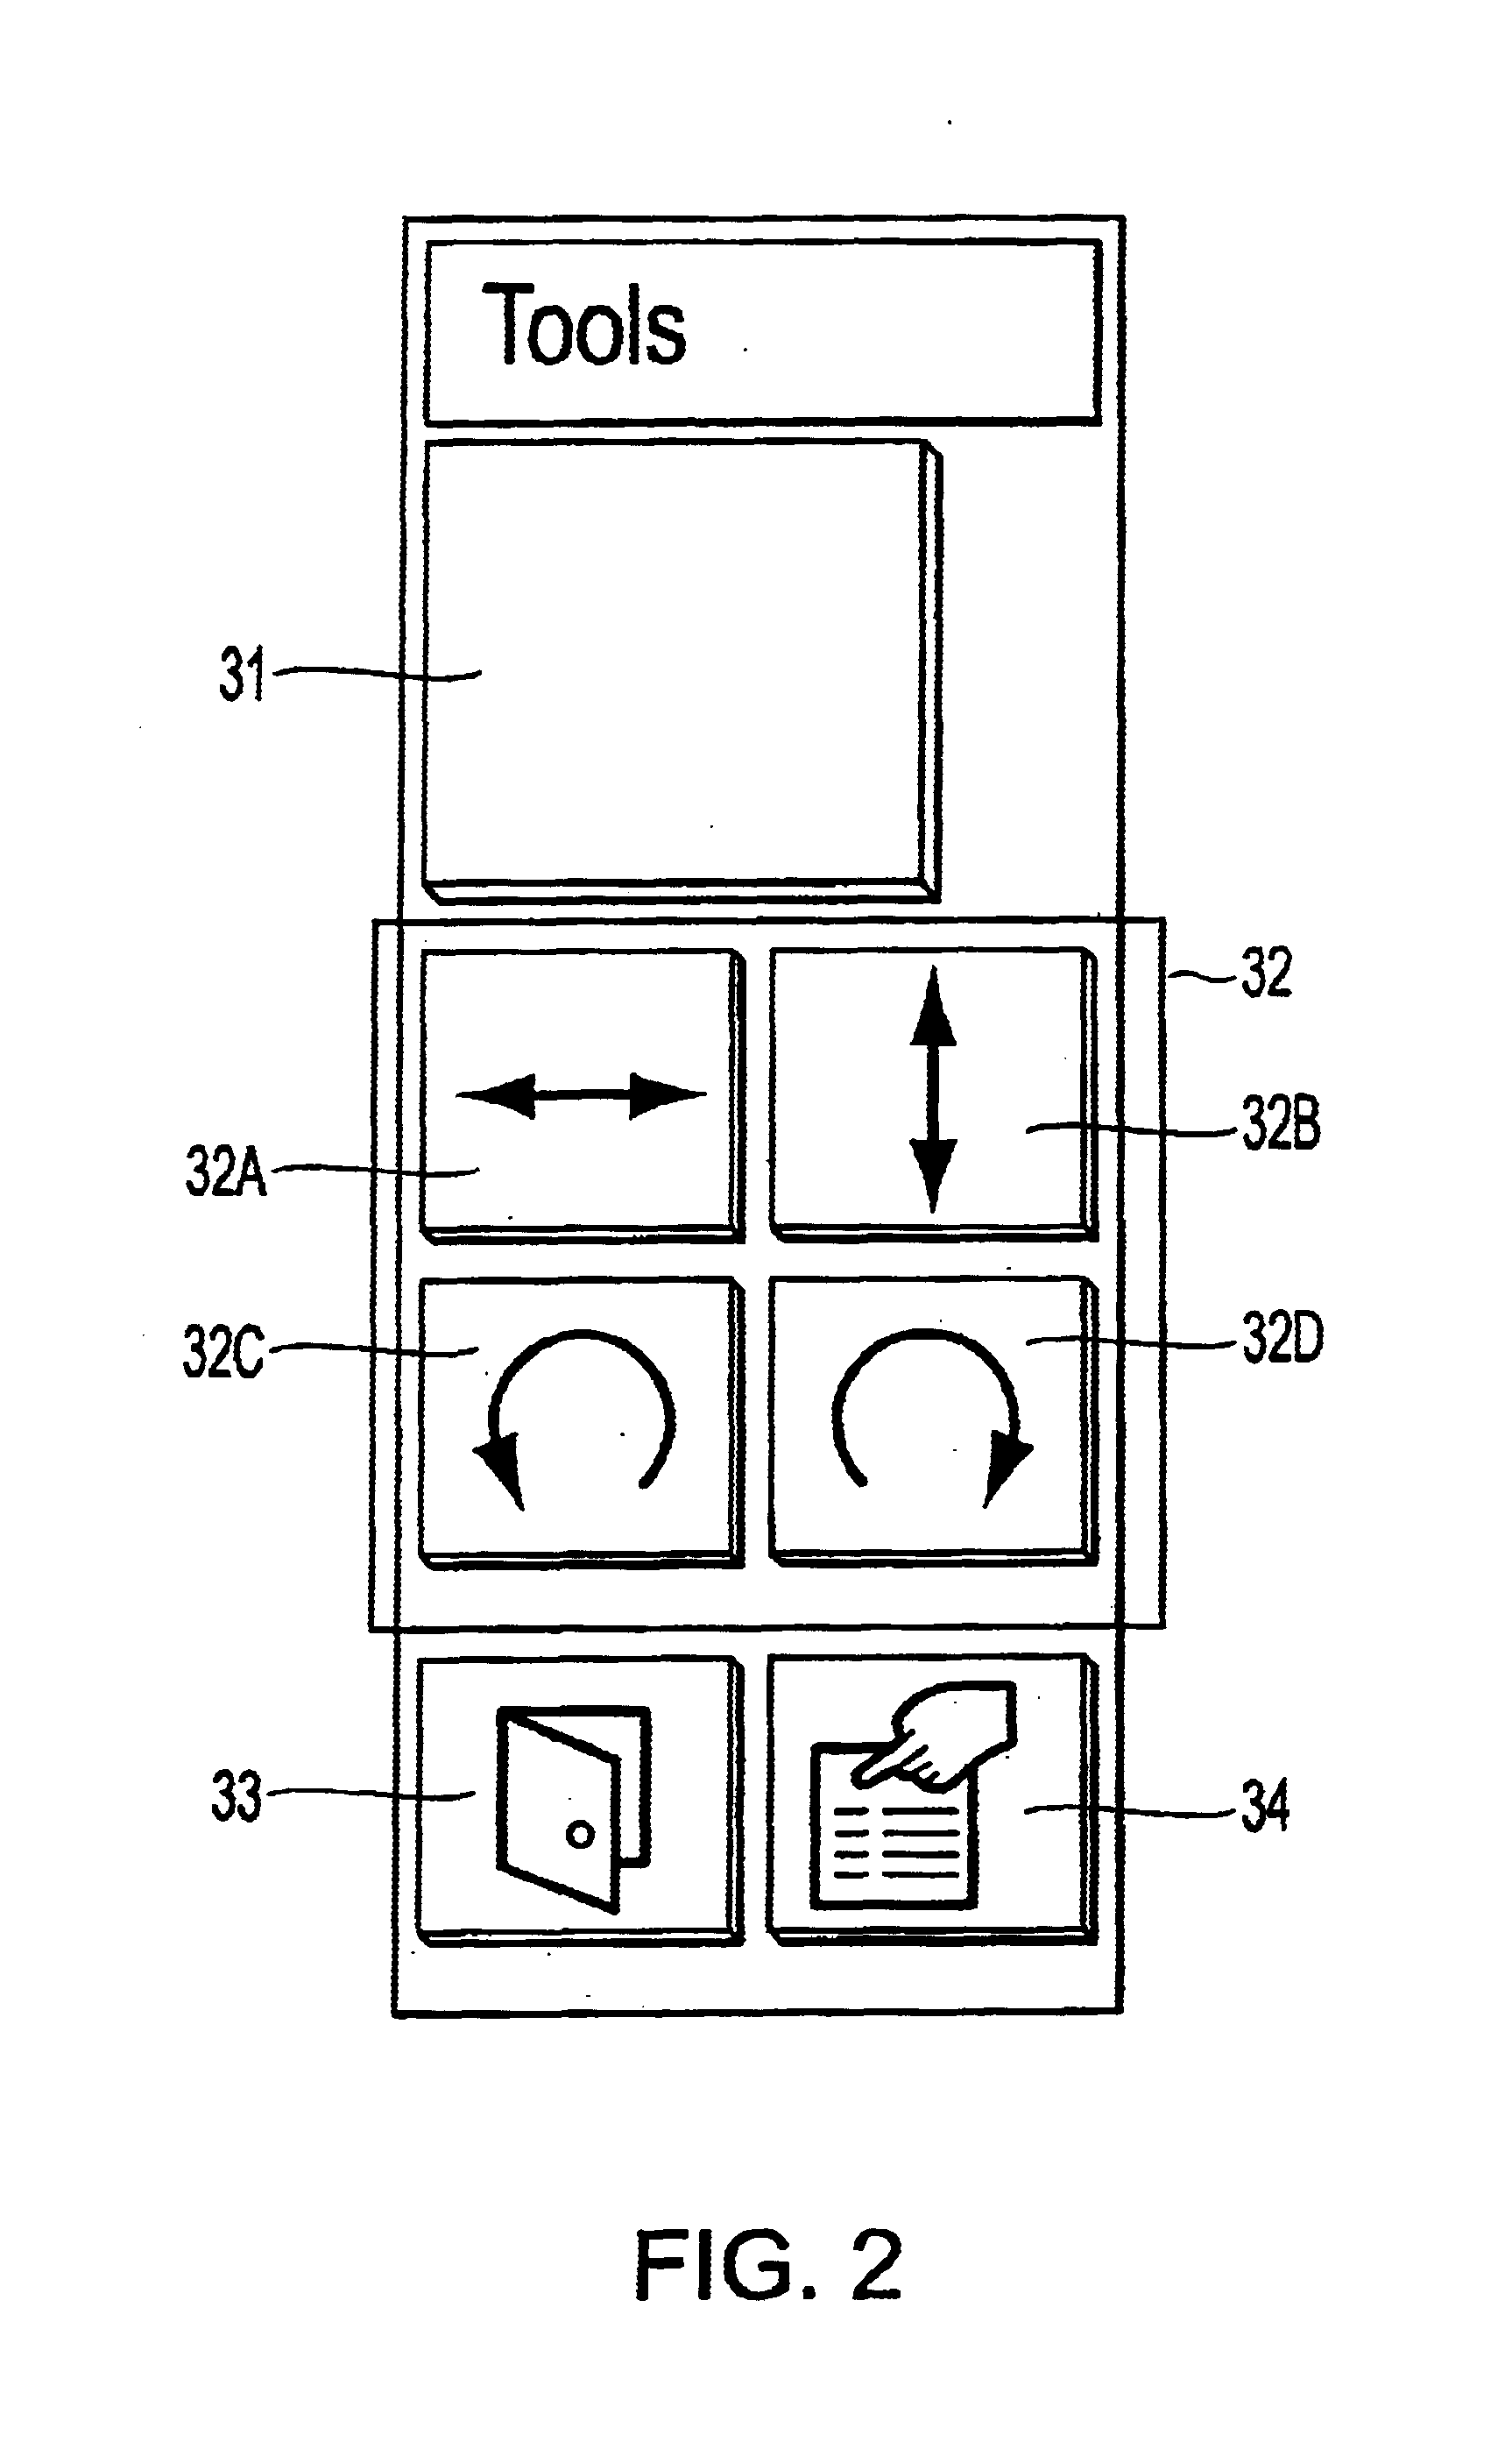 Display apparatus and methods, and recording medium for controlling same